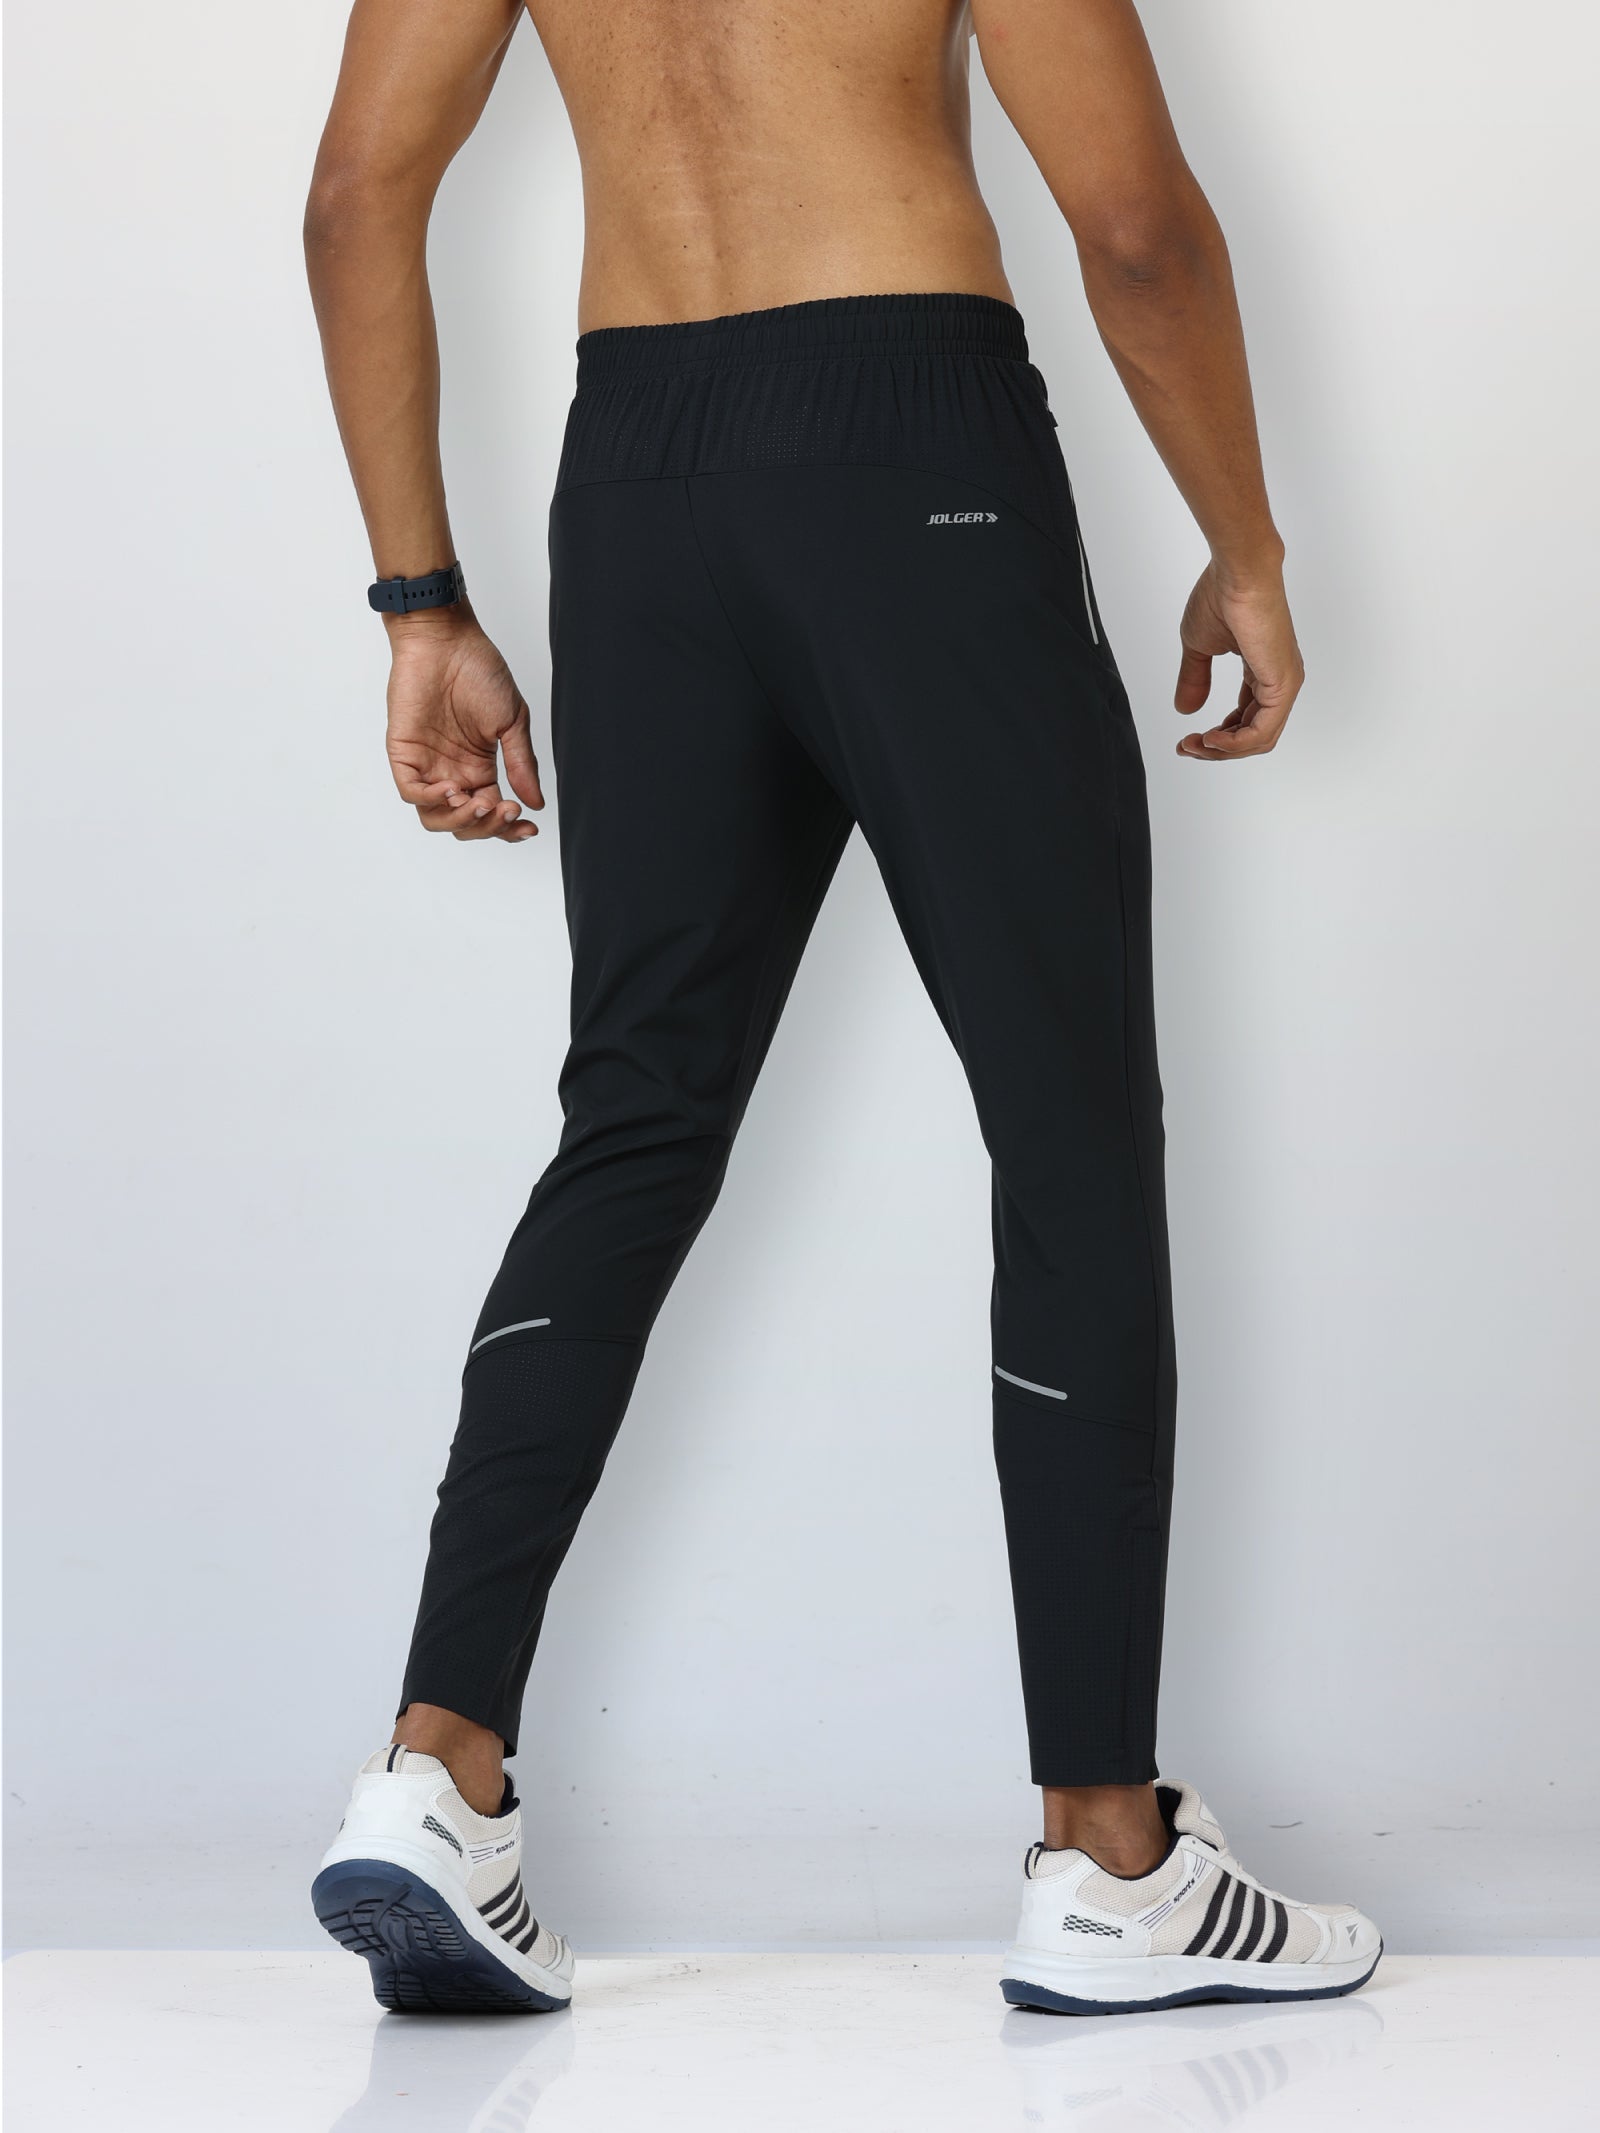 Sports Running Pants Men's Breathable Fitness Training Jogging Sweatpants  Basketball Tennis Trousers Gyms Track Elastic Pants